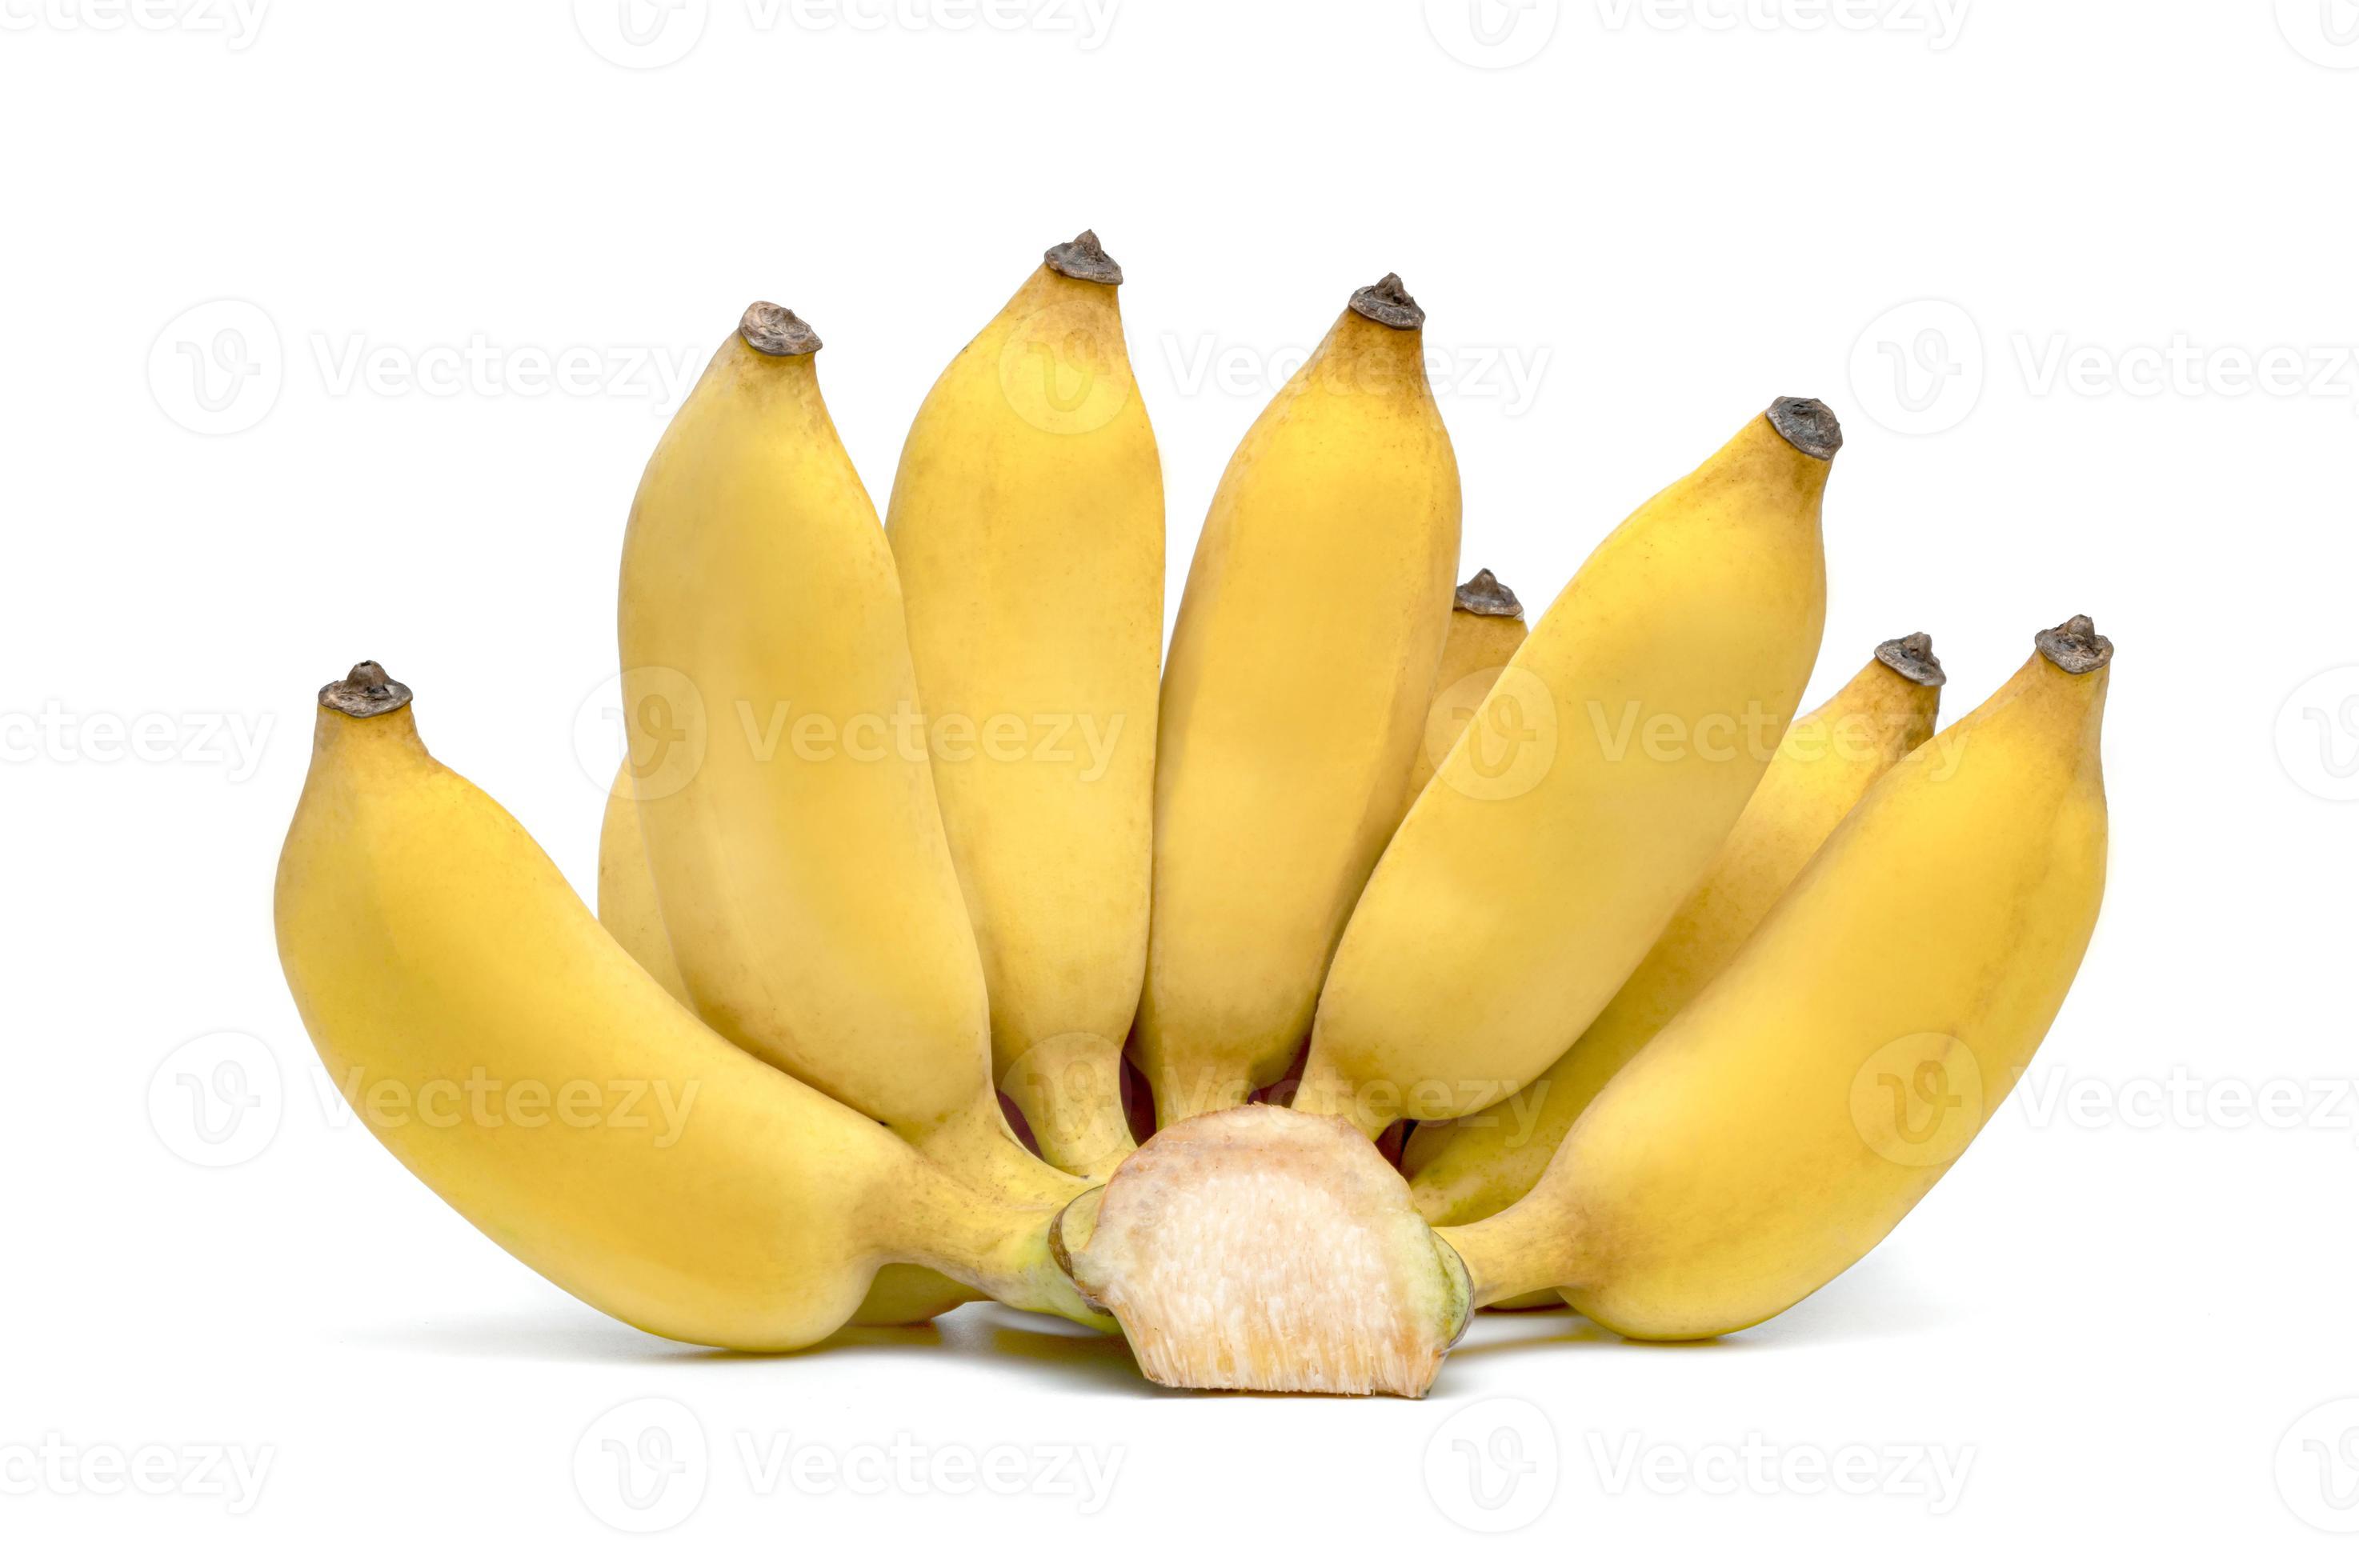 https://static.vecteezy.com/system/resources/previews/010/715/666/large_2x/cultivated-banana-or-pisang-awak-banana-isolated-on-white-background-photo.jpg